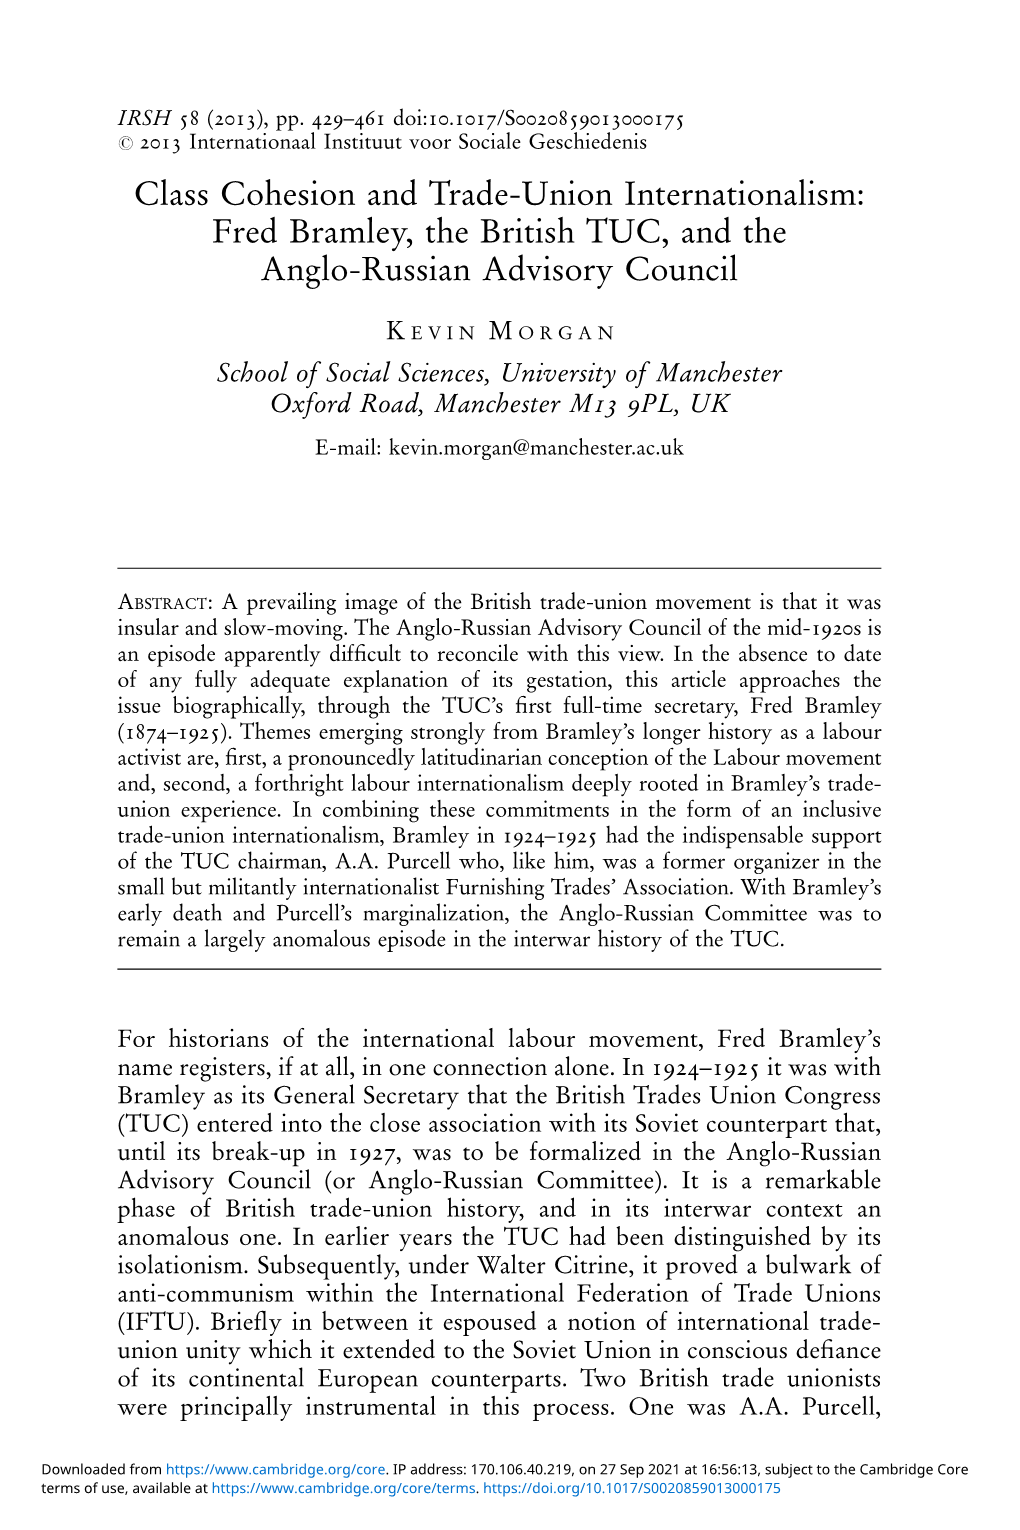 Class Cohesion and Trade-Union Internationalism: Fred Bramley, the British TUC, and the Anglo-Russian Advisory Council